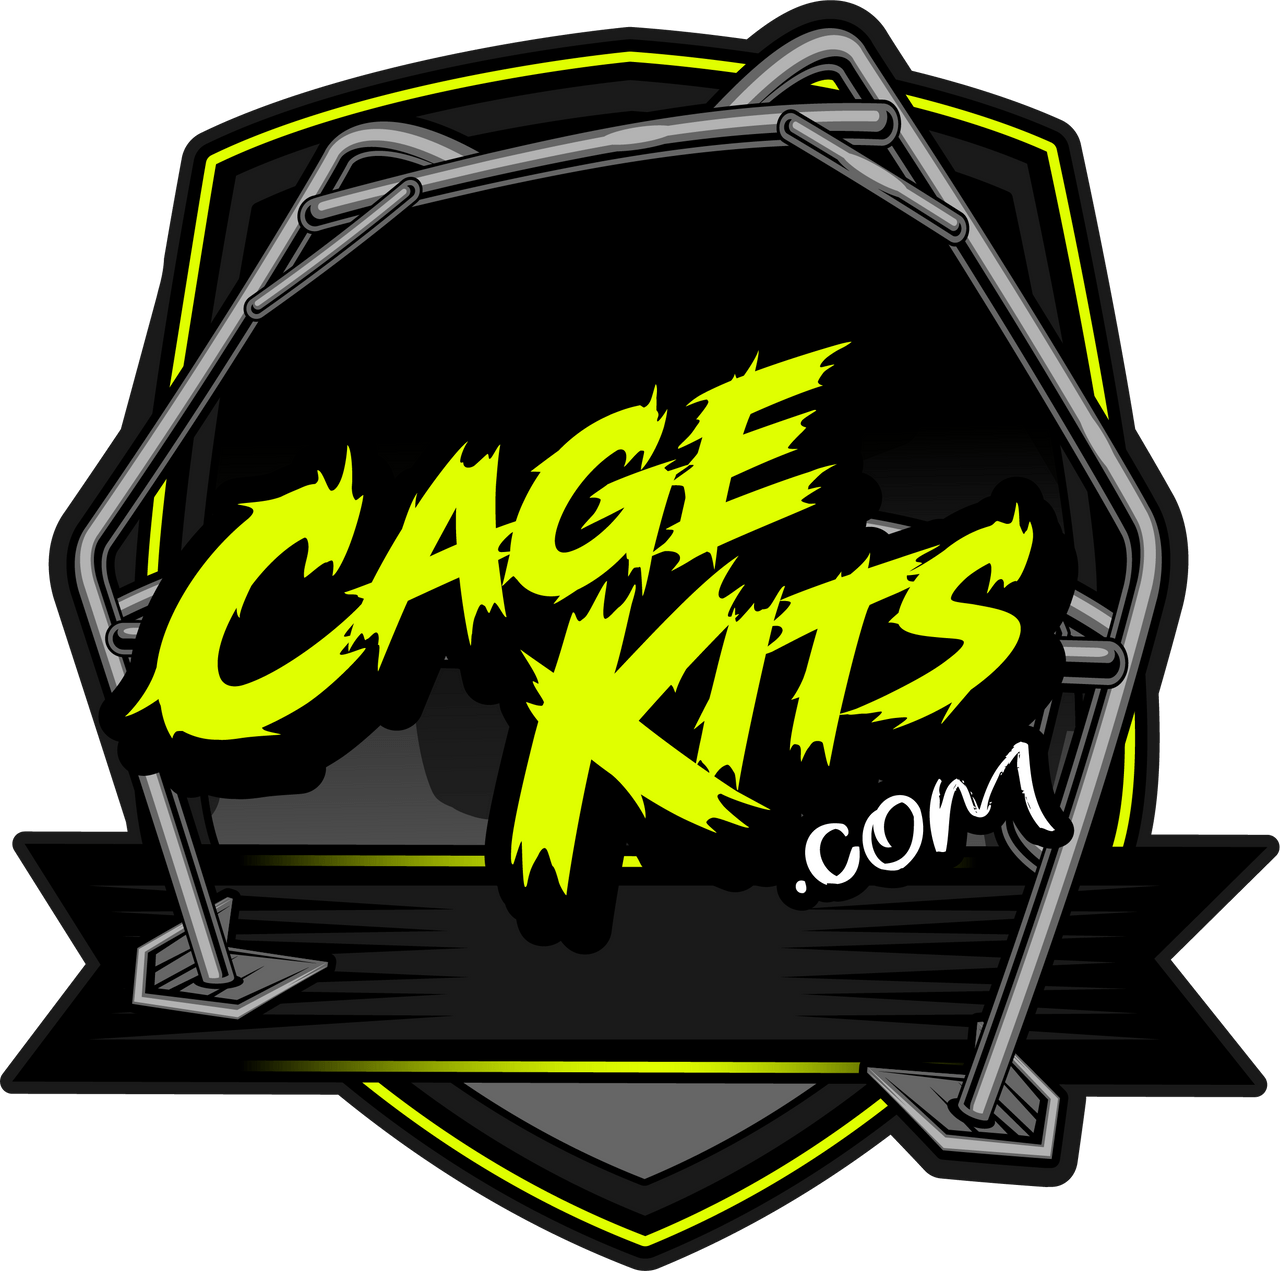 Made in America by Cage Kits! 